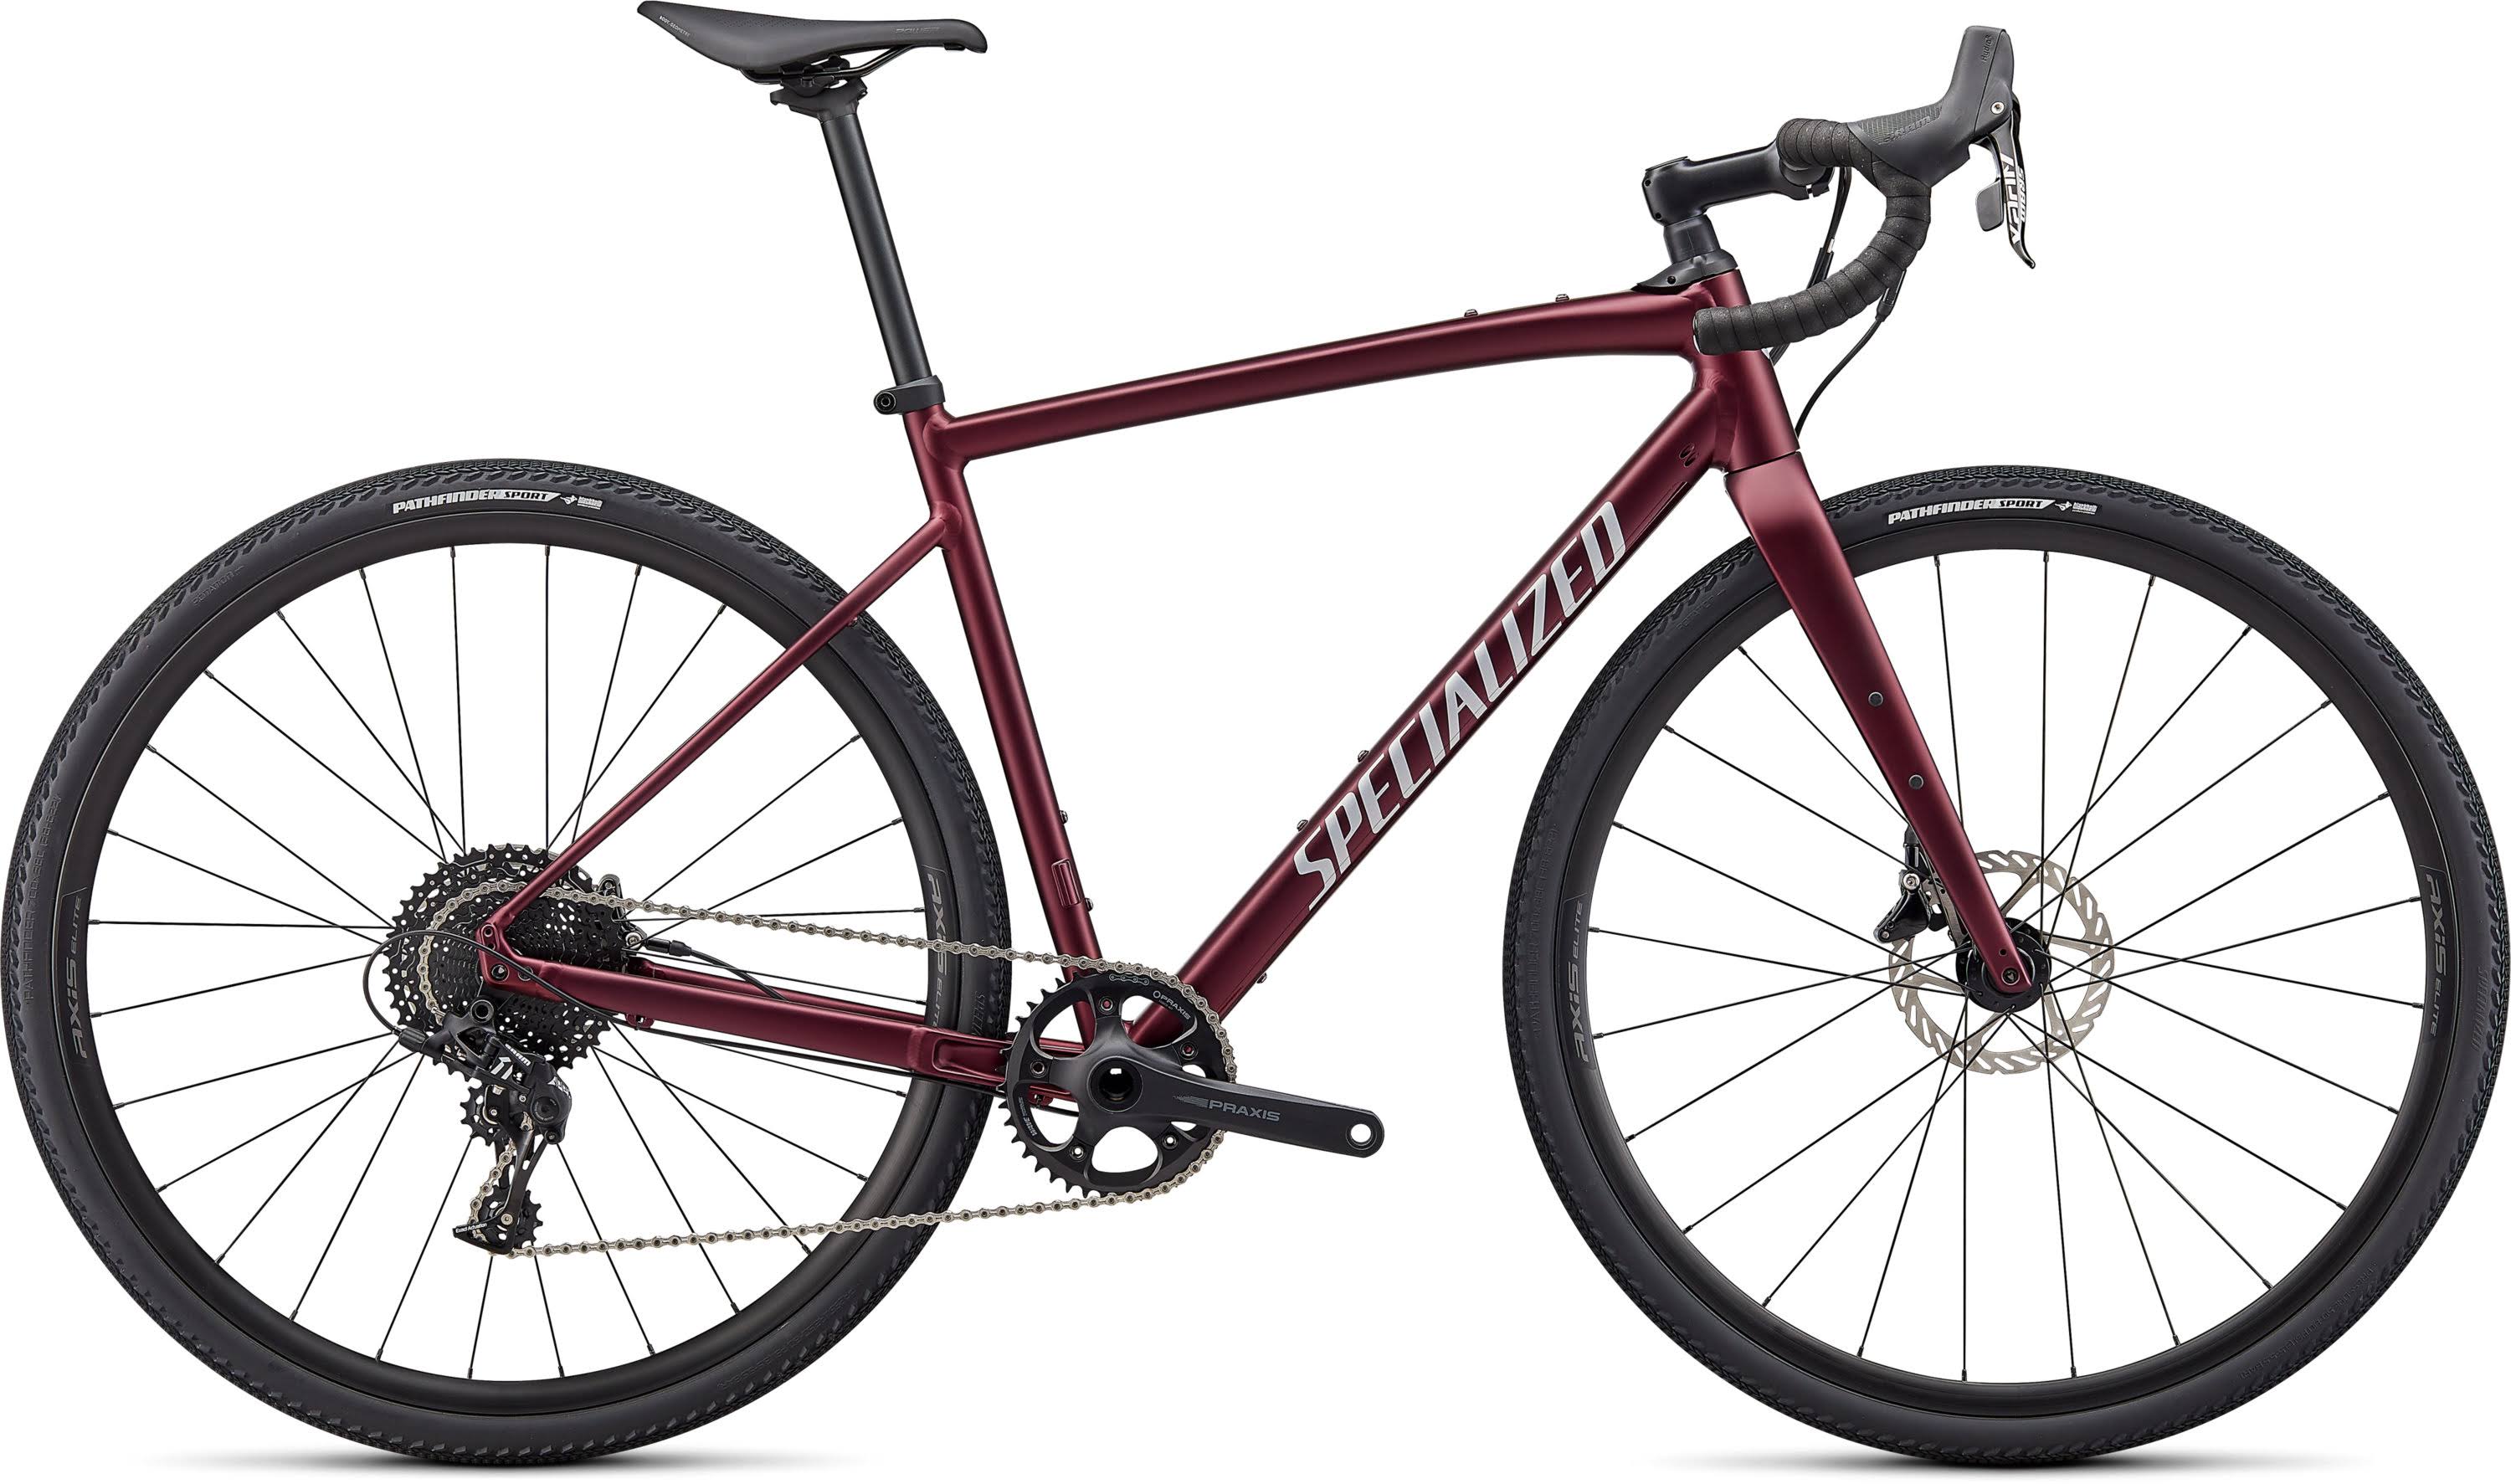 Specialized Diverge Comp E5 2022 Gravel Road Bike - Maroon/Silver